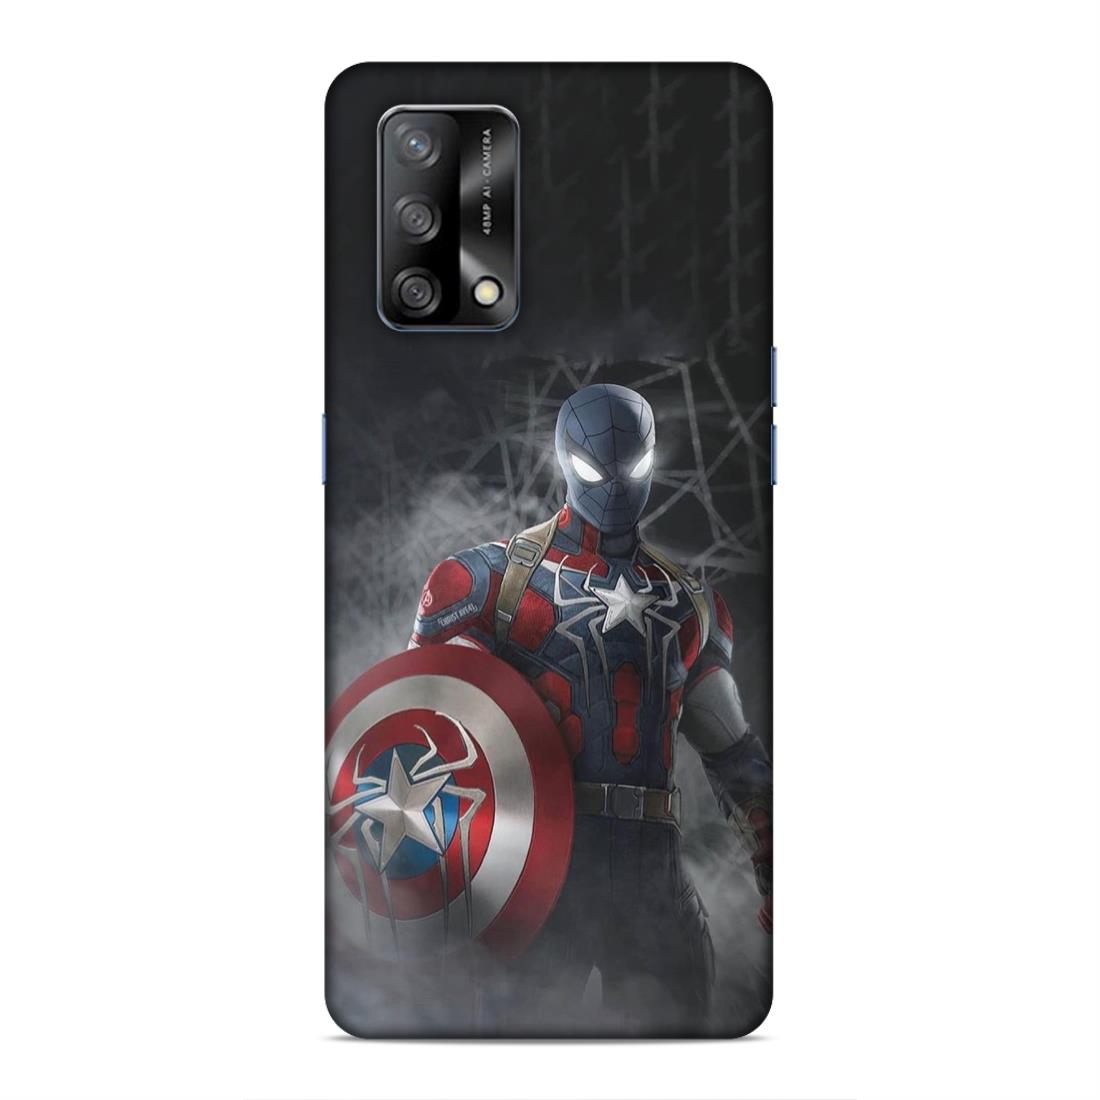 Spiderman With Shild Hard Back Case For Oppo F19 / F19s